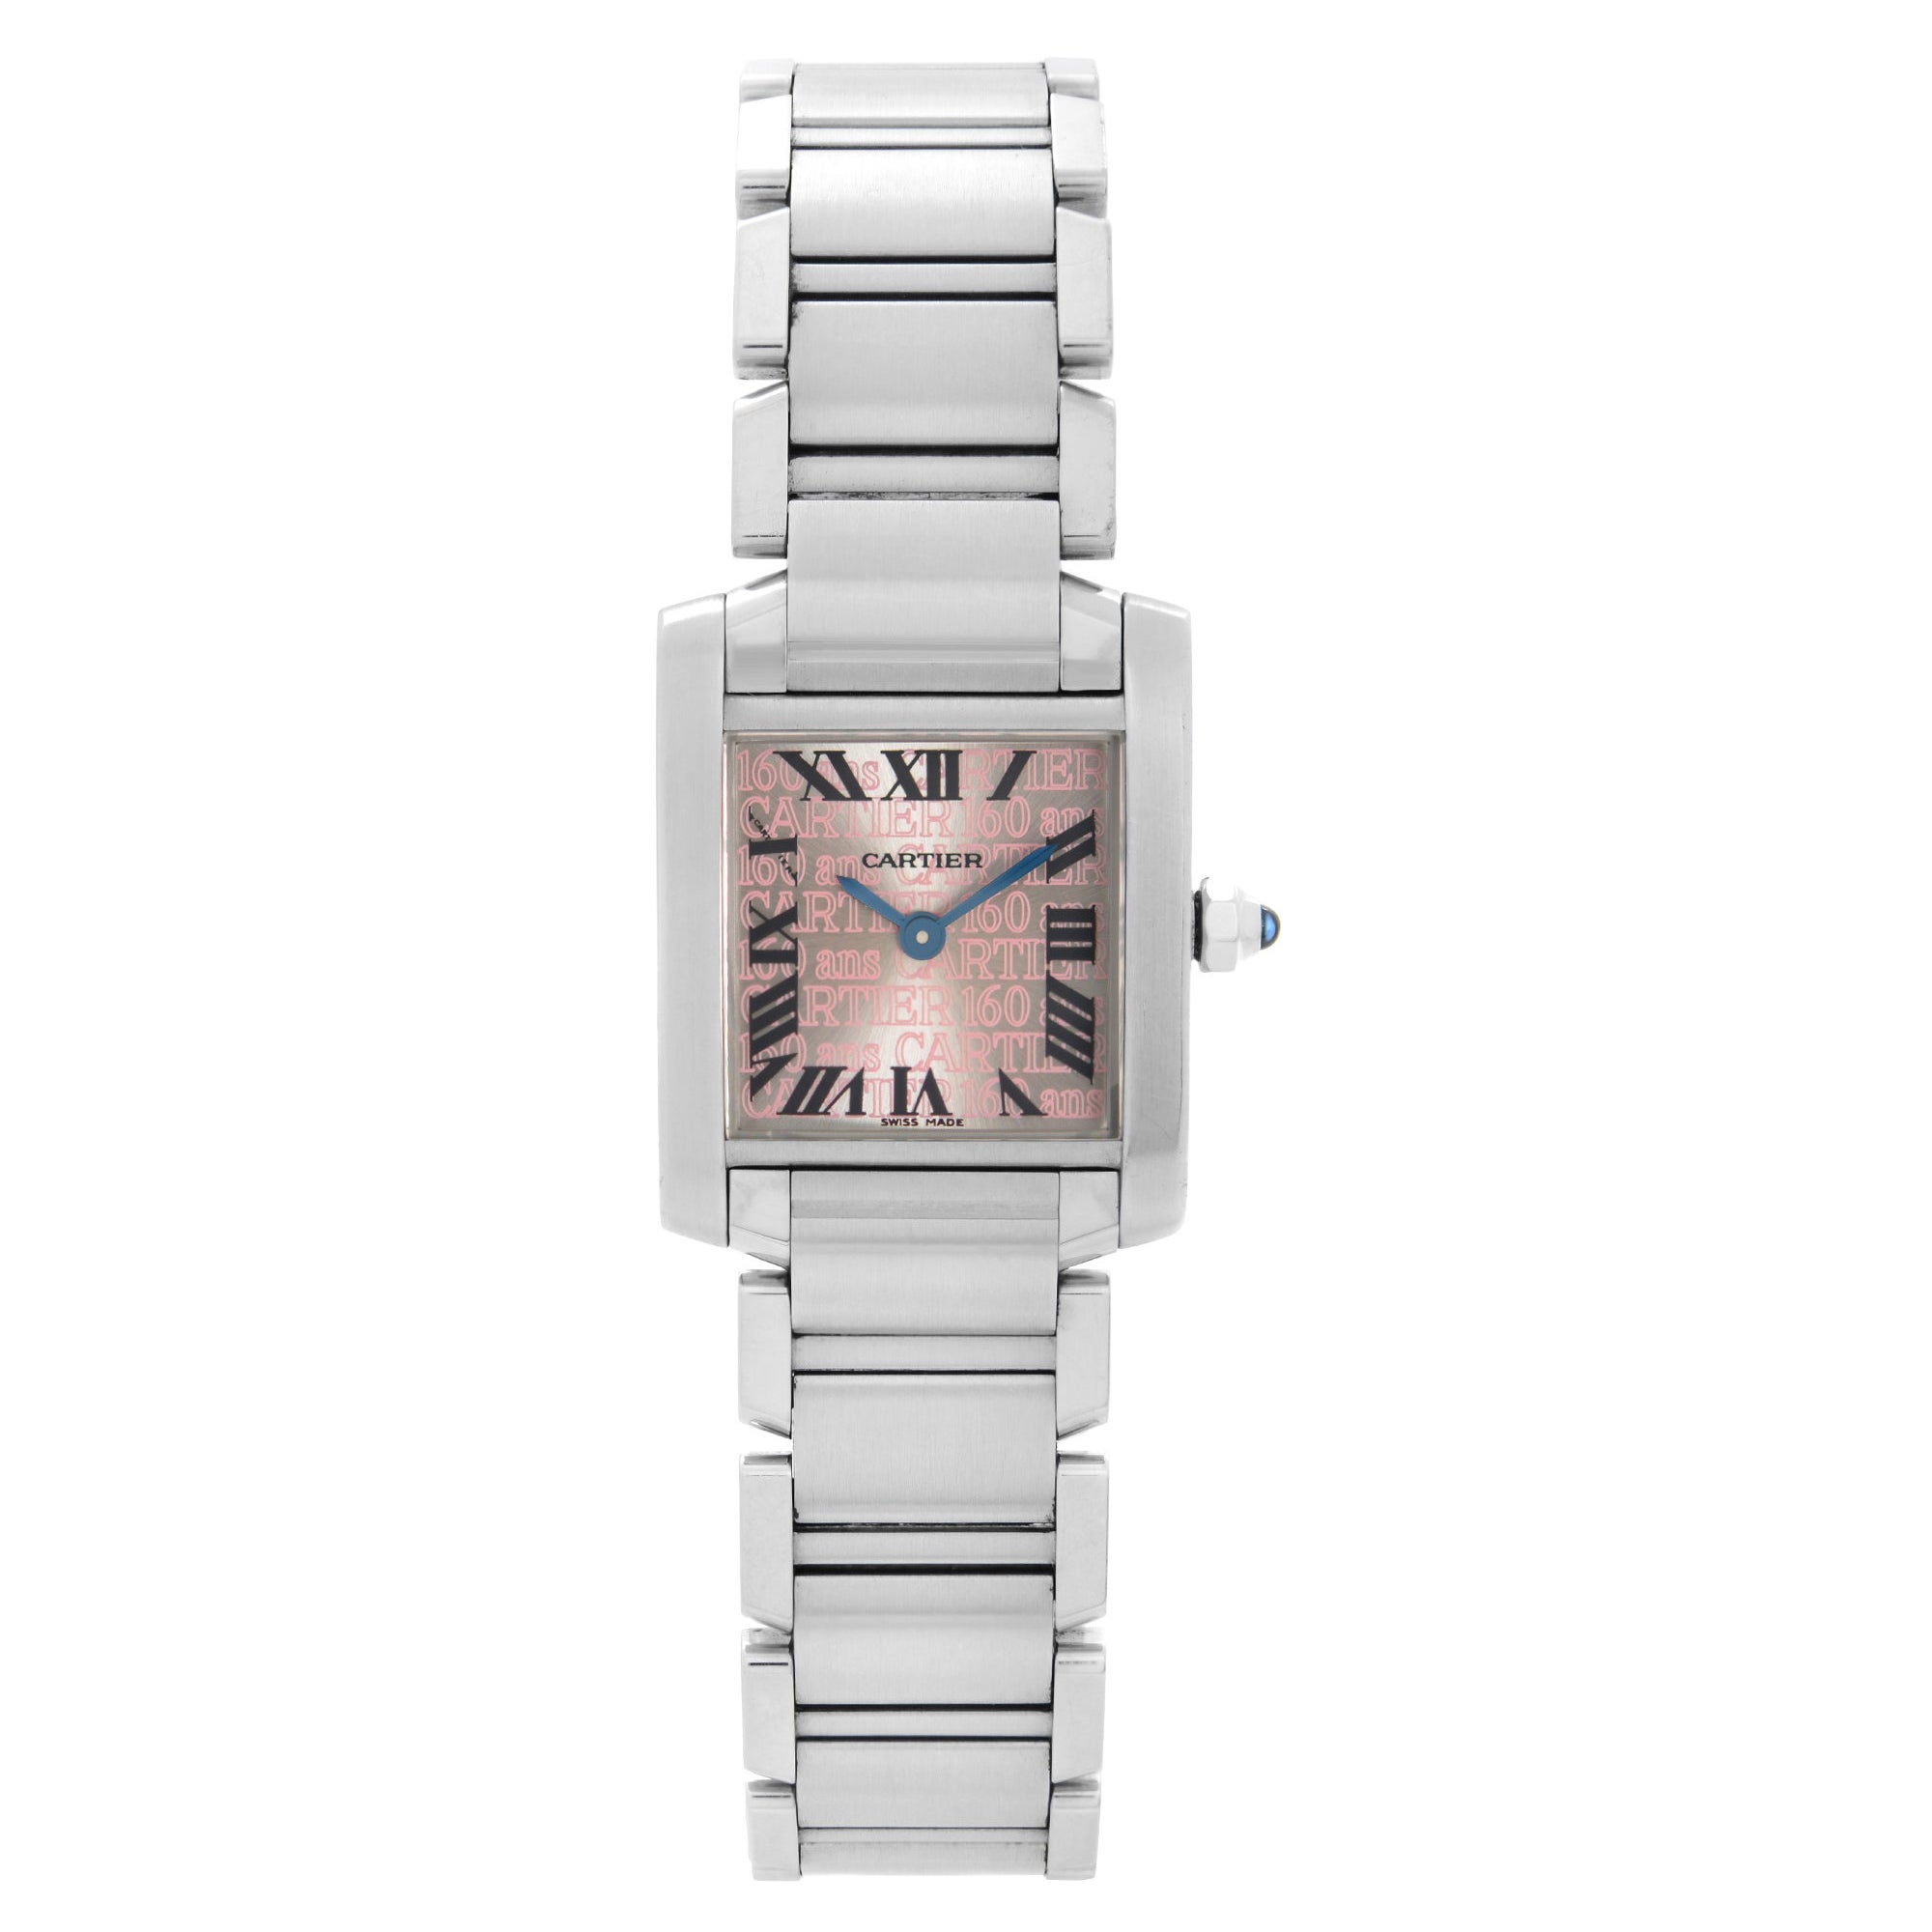 Cartier Tank Francaise 160th Anniversary Steel Pink Dial Ladies Watch 2384